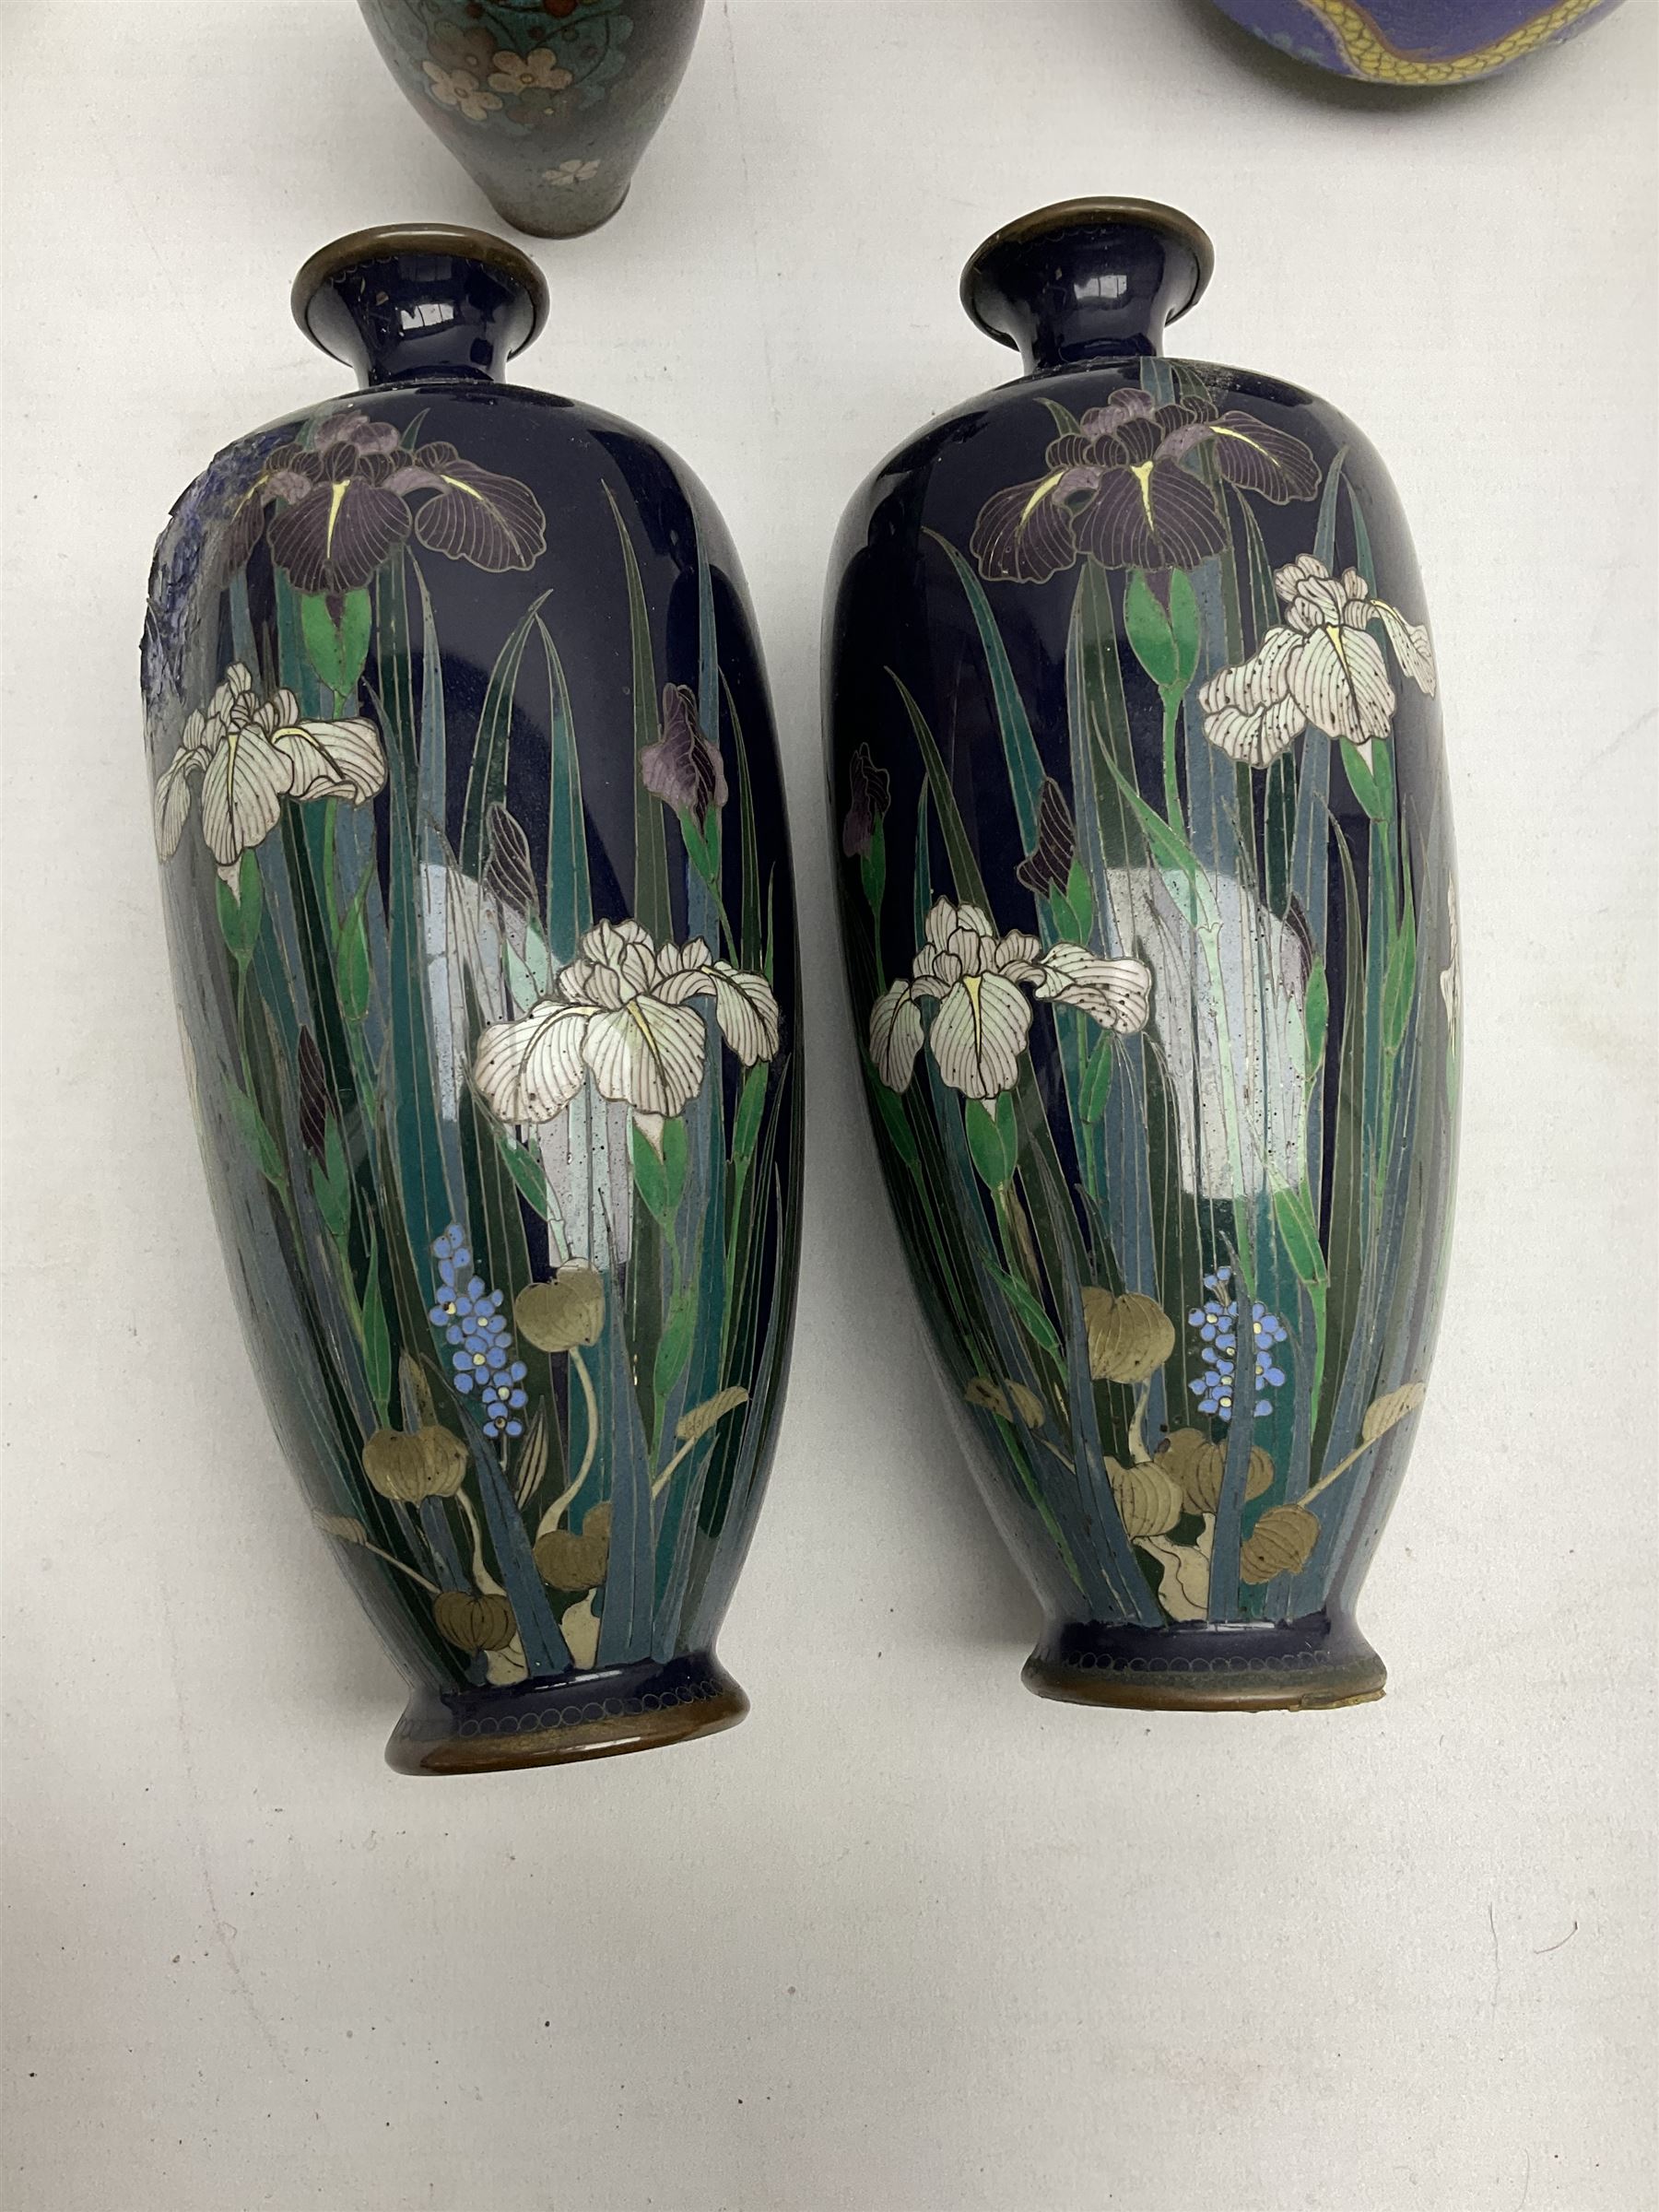 Pair of Japanese Meiji period cloisonn� vases of slender ovoid form decorated with iris flowers in p - Image 3 of 4